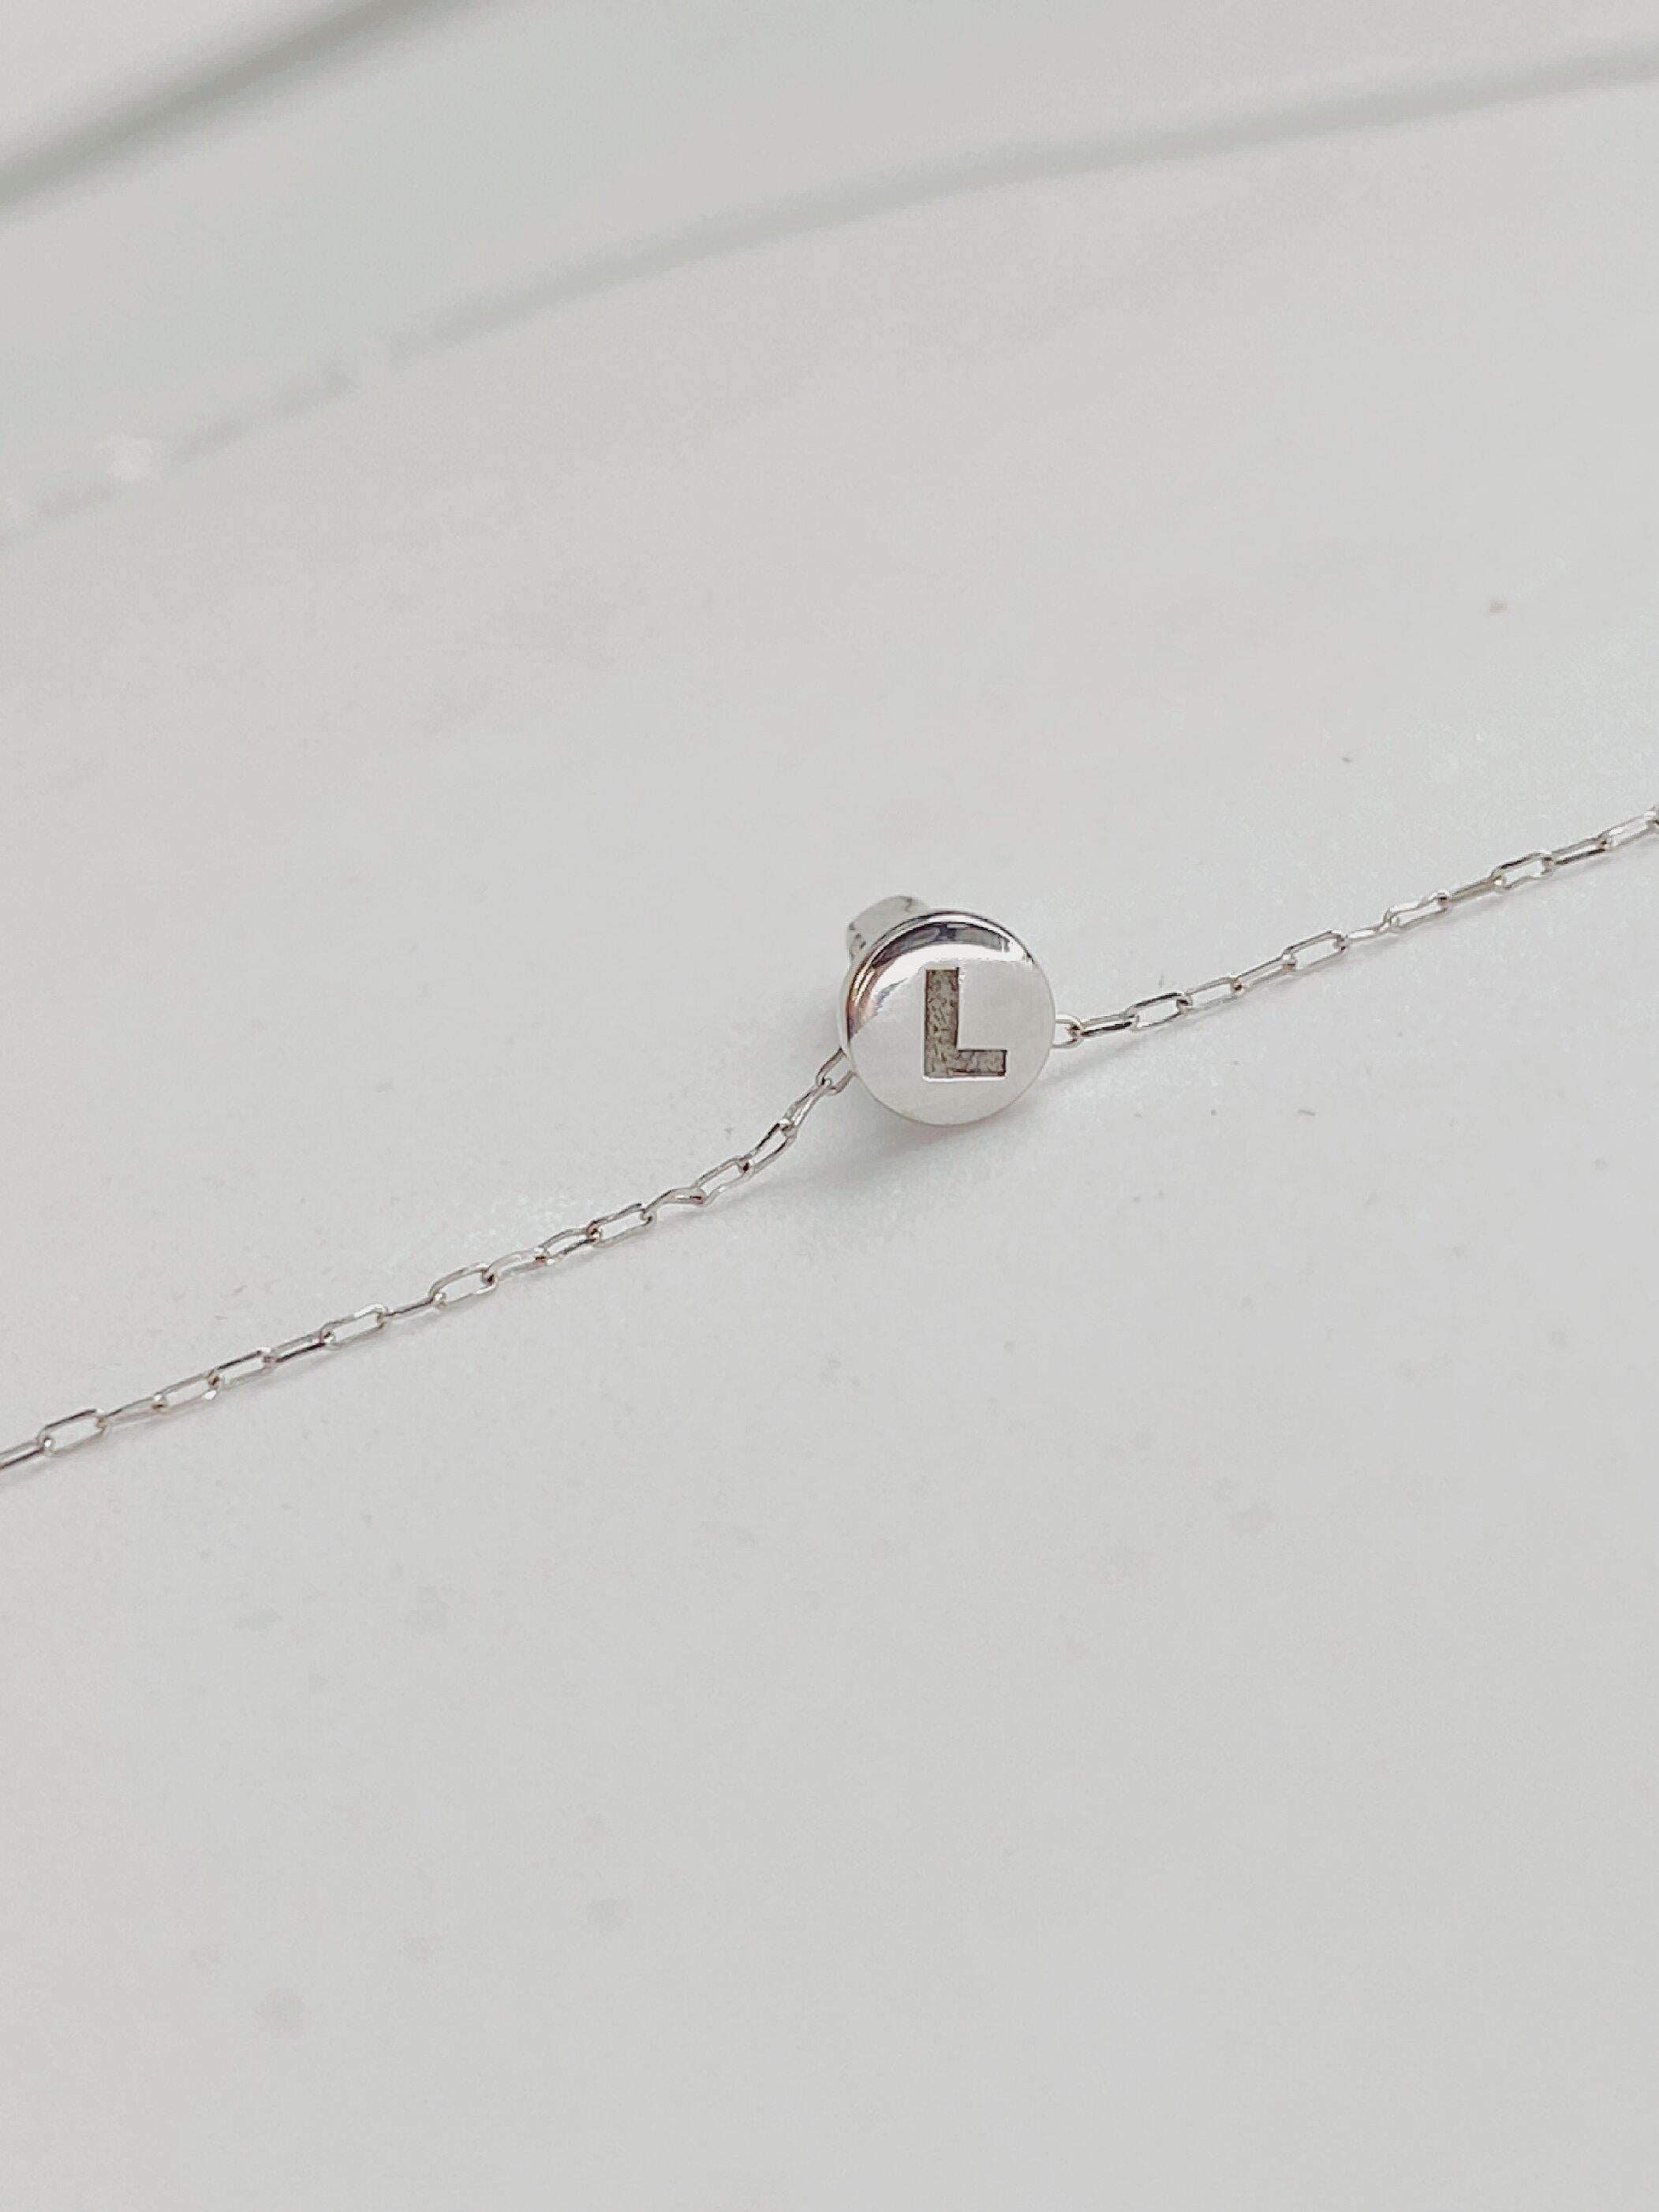 This captivating 18k white gold chain and pendant features a nail set with full cut natural Diamonds.  Each pendant is custom made and engraved with the letter of your choice. These “ Though as nails” necklaces are both delicate, edgy and most